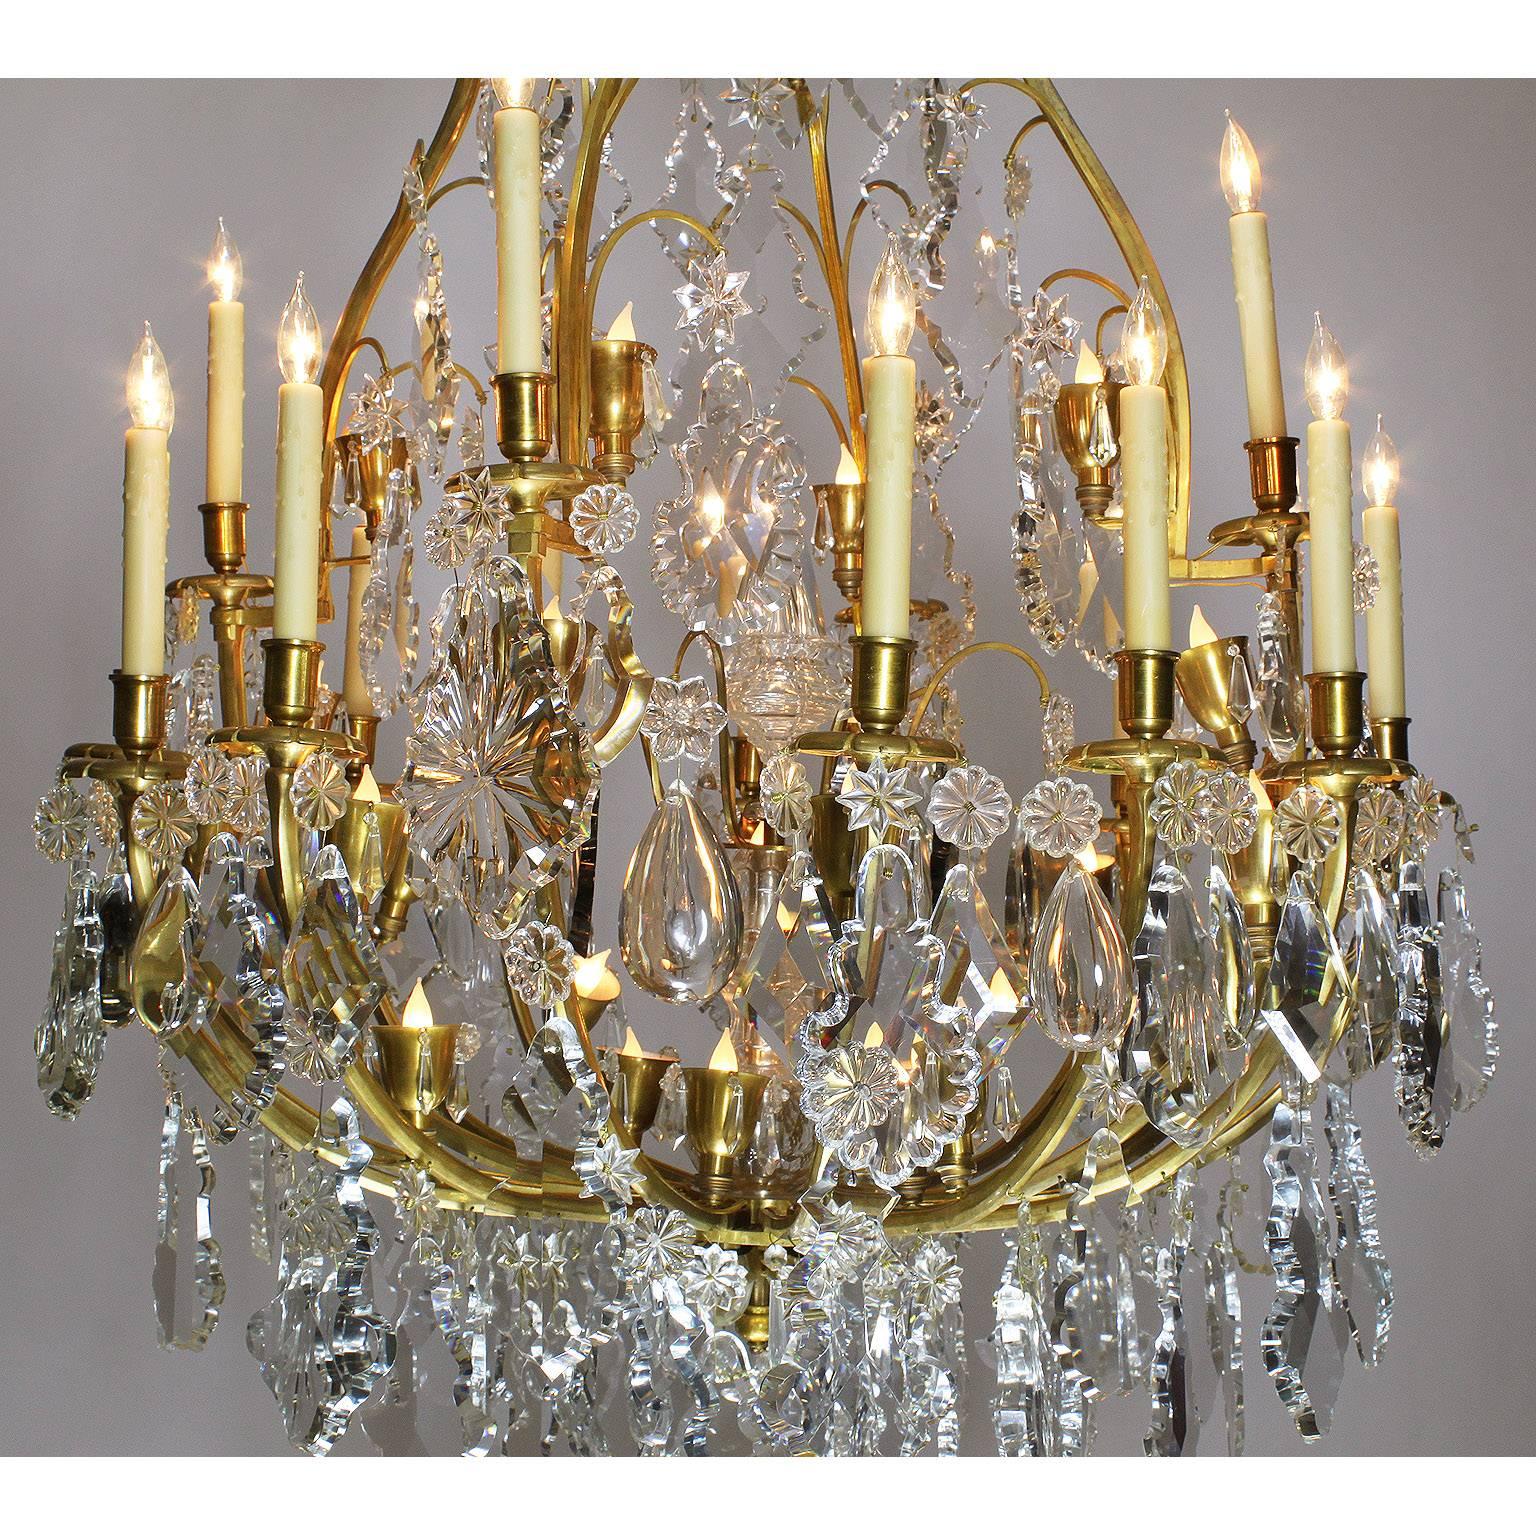 A palatial French 19th century Louis XV style gilt bronze and cut-glass 16 candle-arms and 28 Interior light chandelier, attributed to Baccarat. The elongated gilt bronze frame with 16 scrolled candle arms (now electrified) and 28 brass cups lights